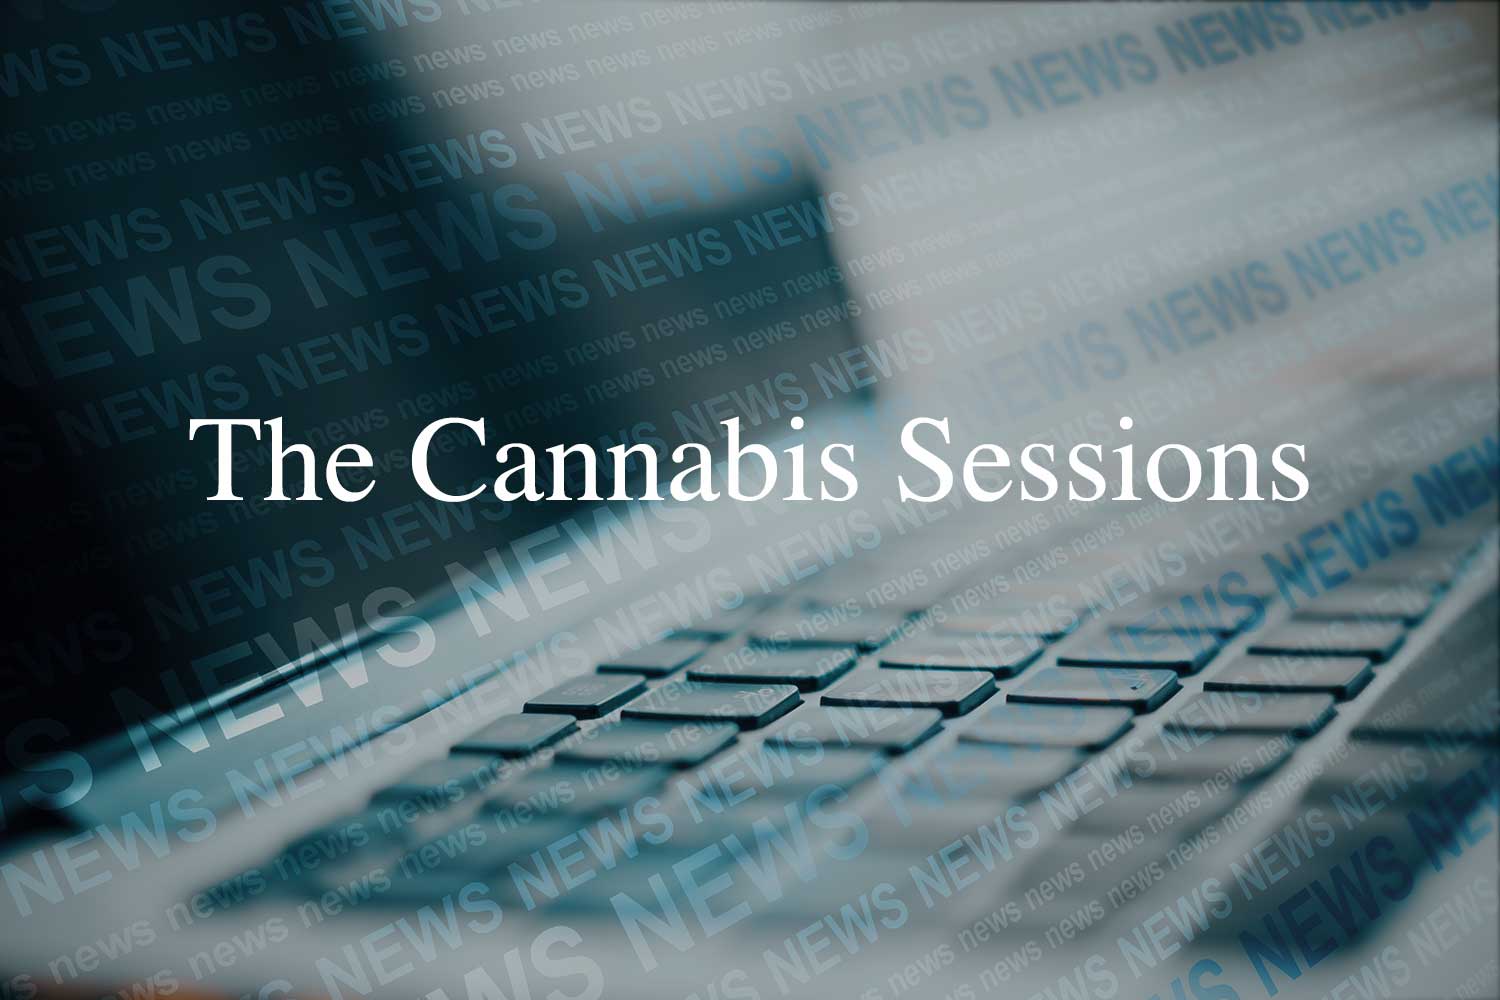 The Cannabis Sessions